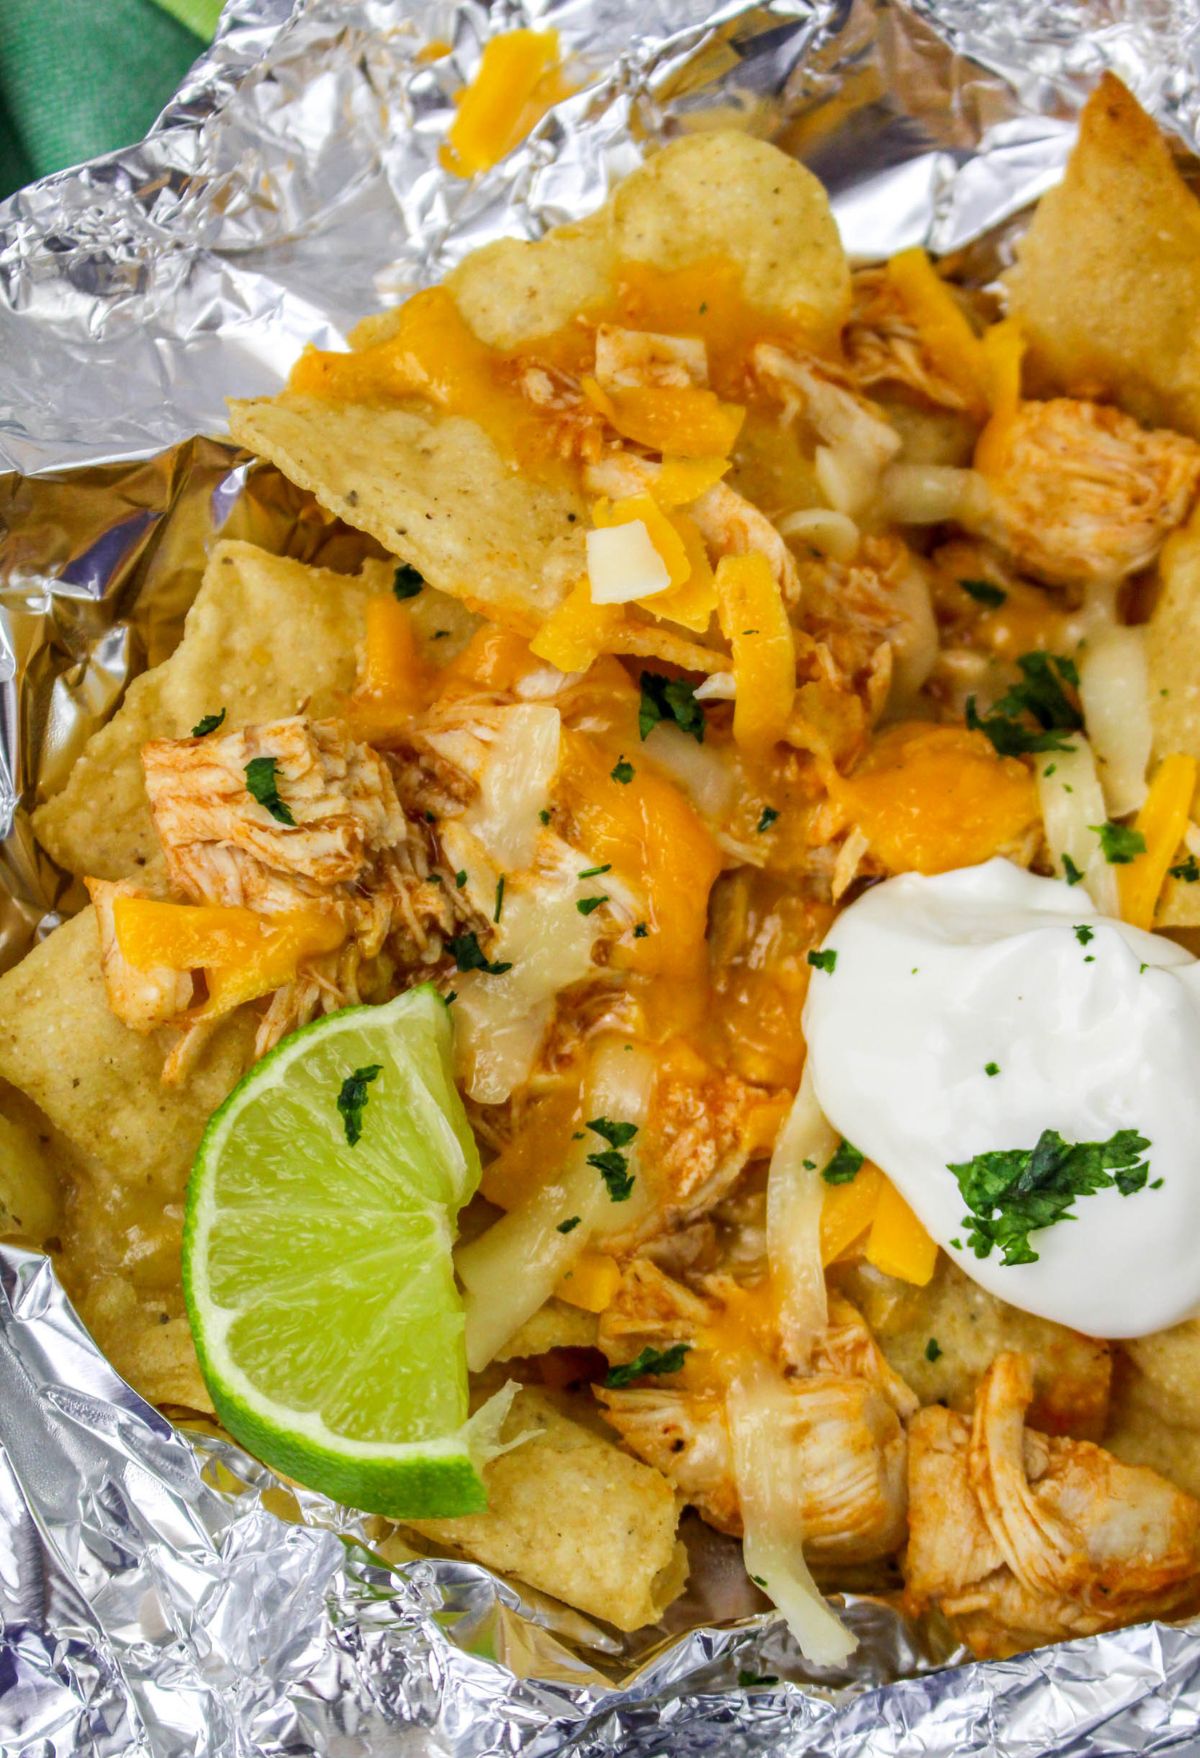 Chicken nachos in foil with sour cream and lime wedges make for a delicious and satisfying meal.